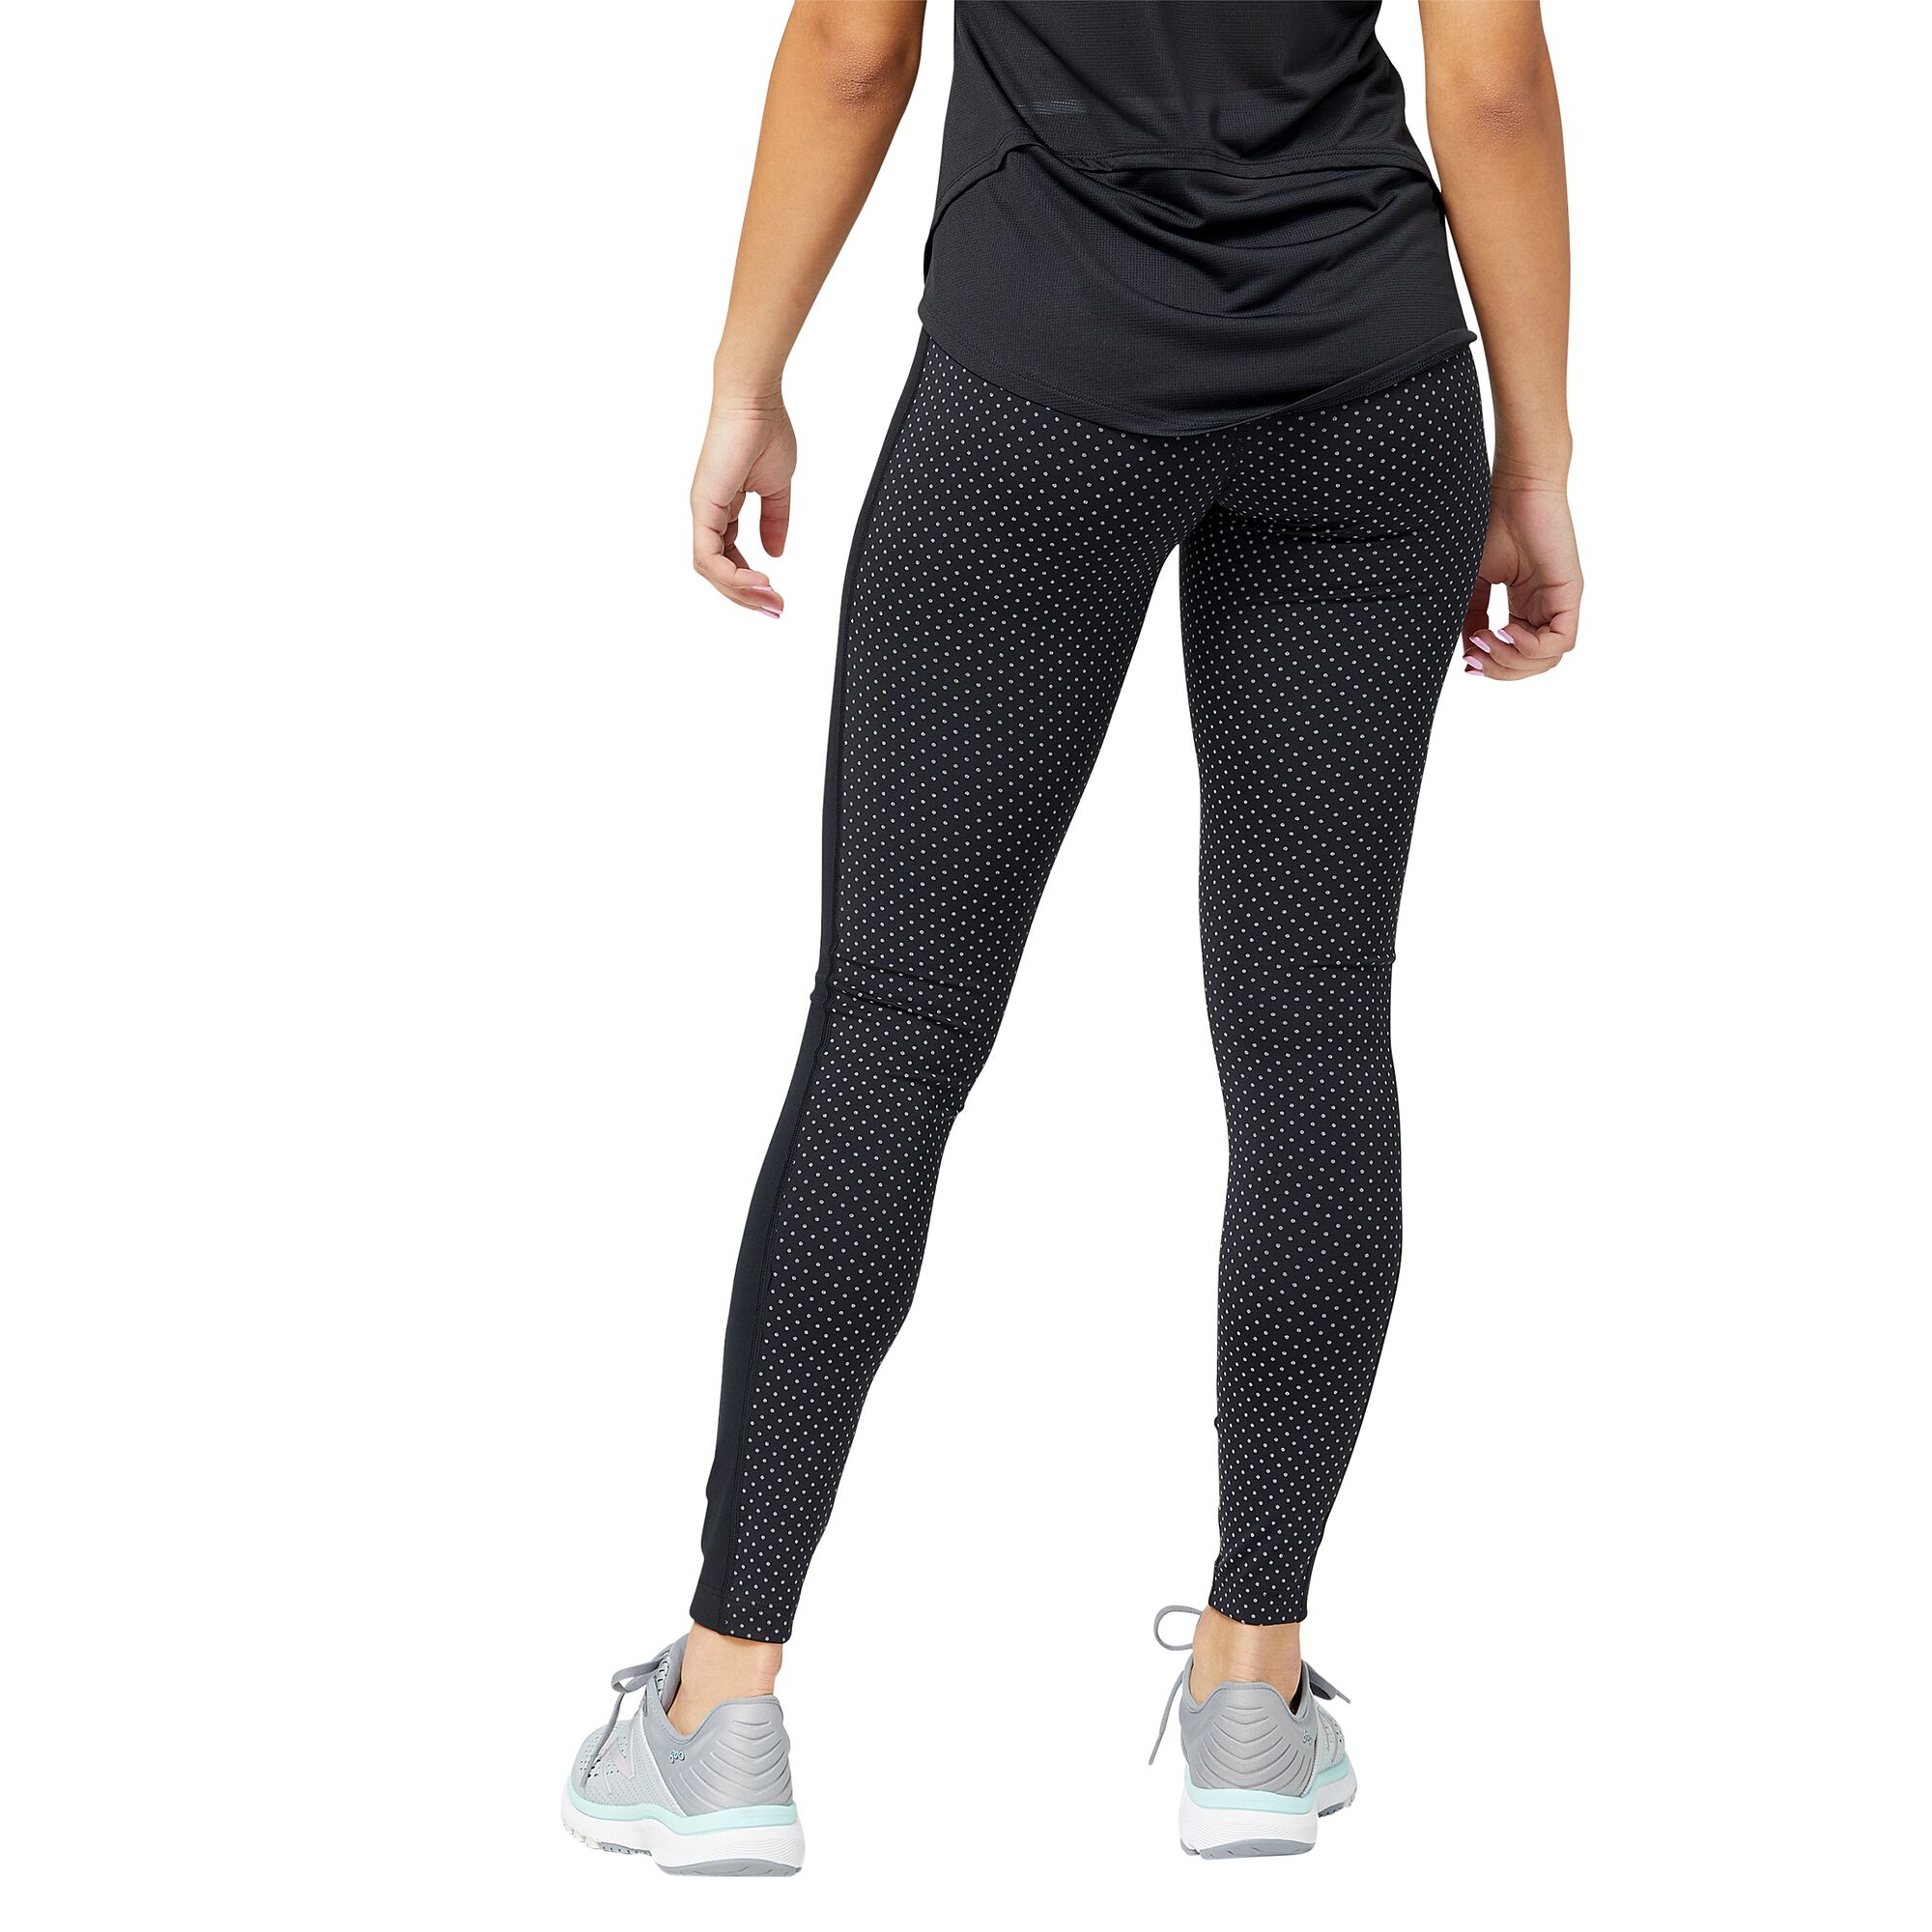 Buy New Balance Reflective Accelerate Tight Women Black online